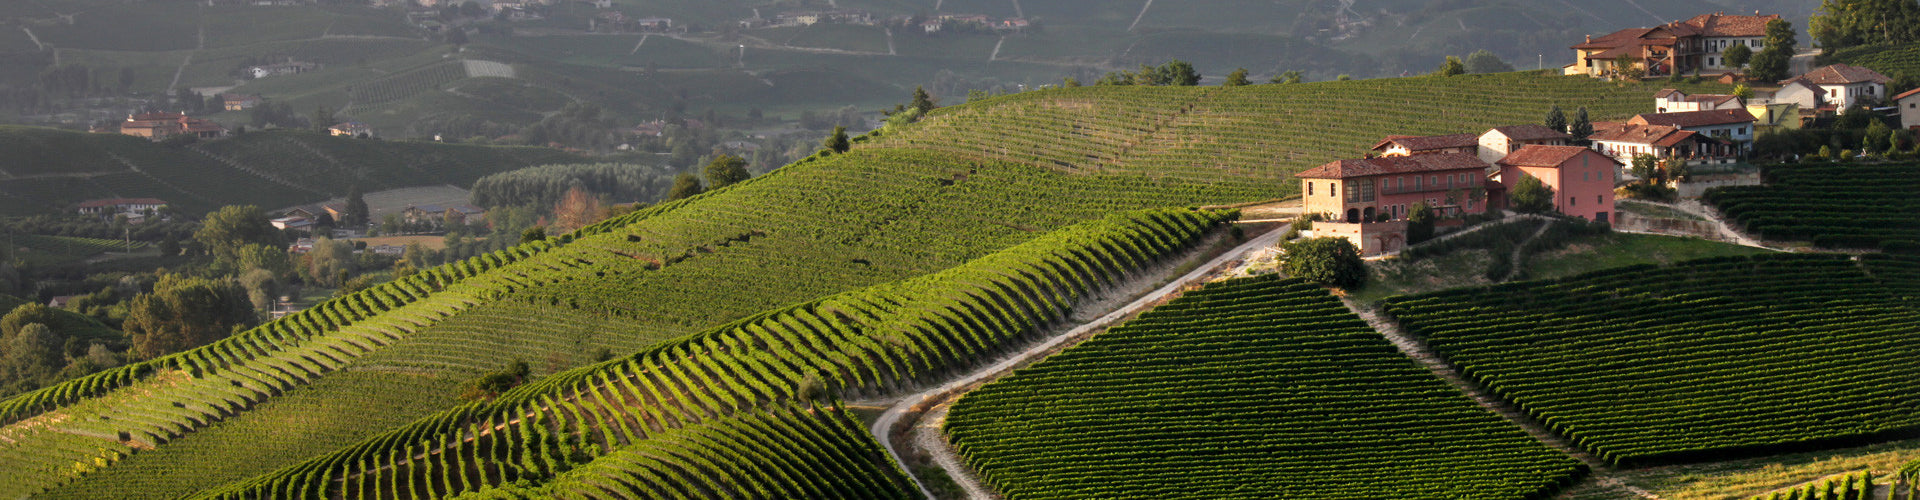 The Prunotto Estate and Vineyards in Piemonte, Italy